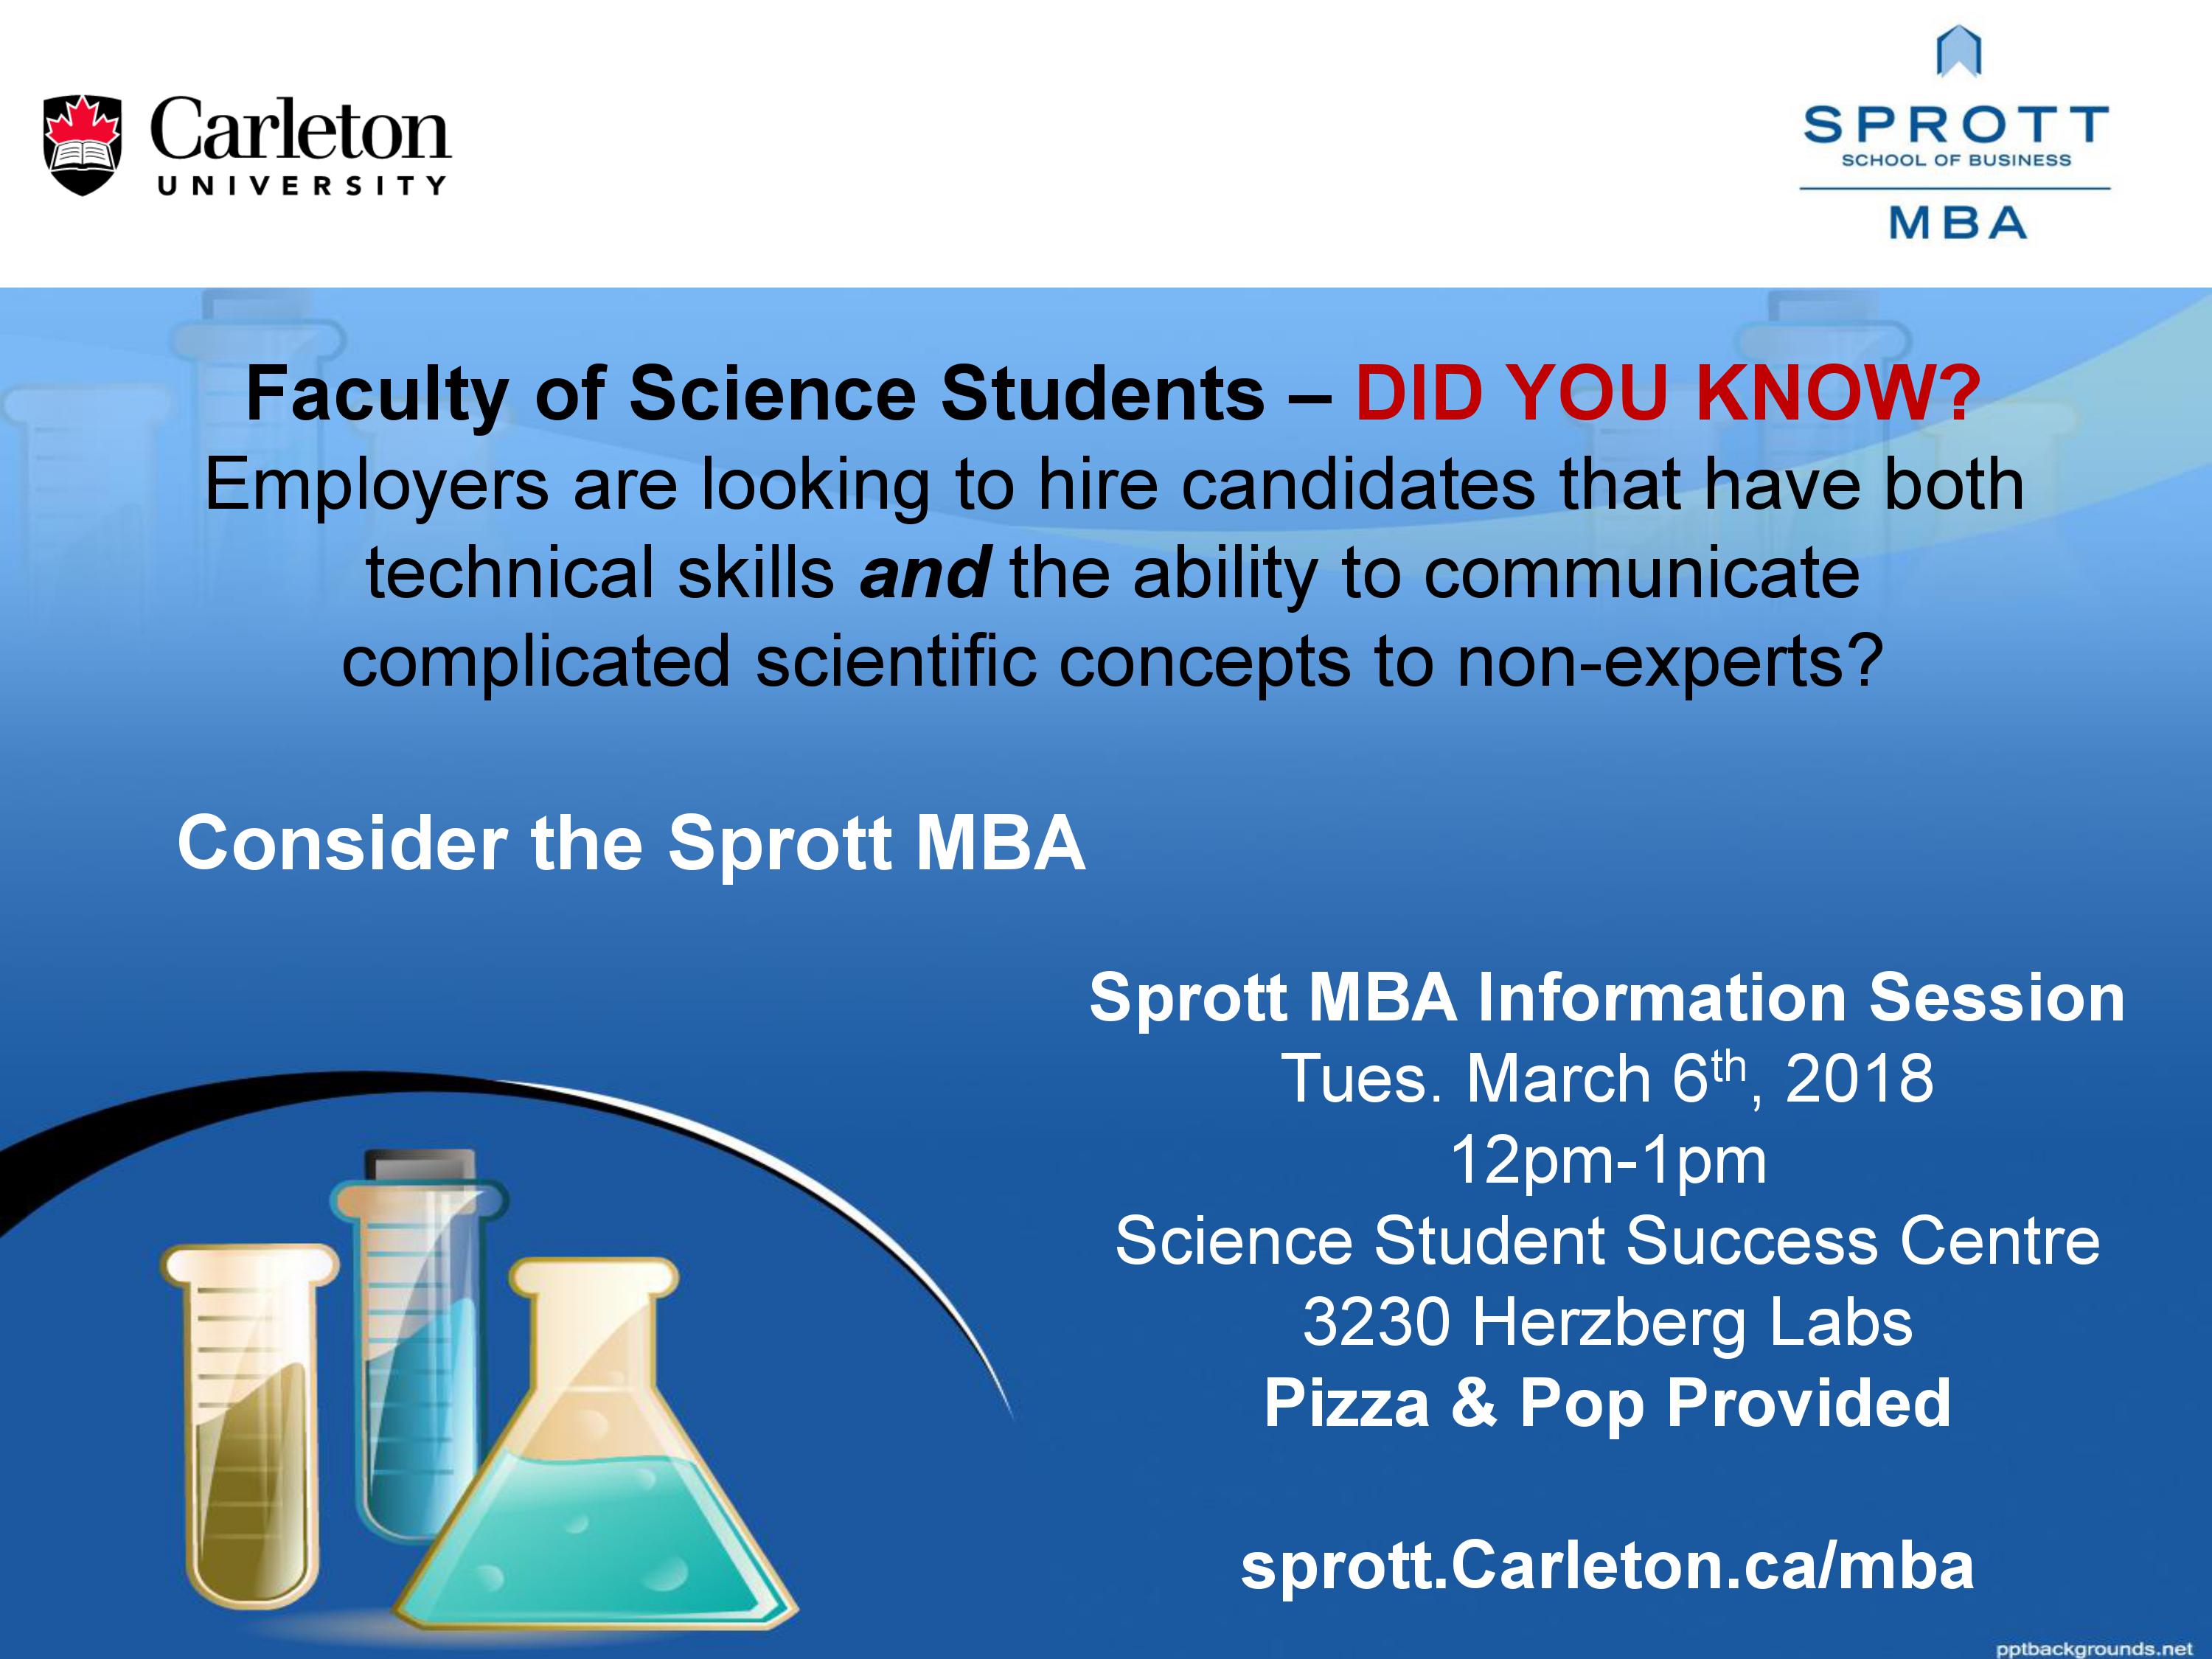 Sprott MBA info session for science students